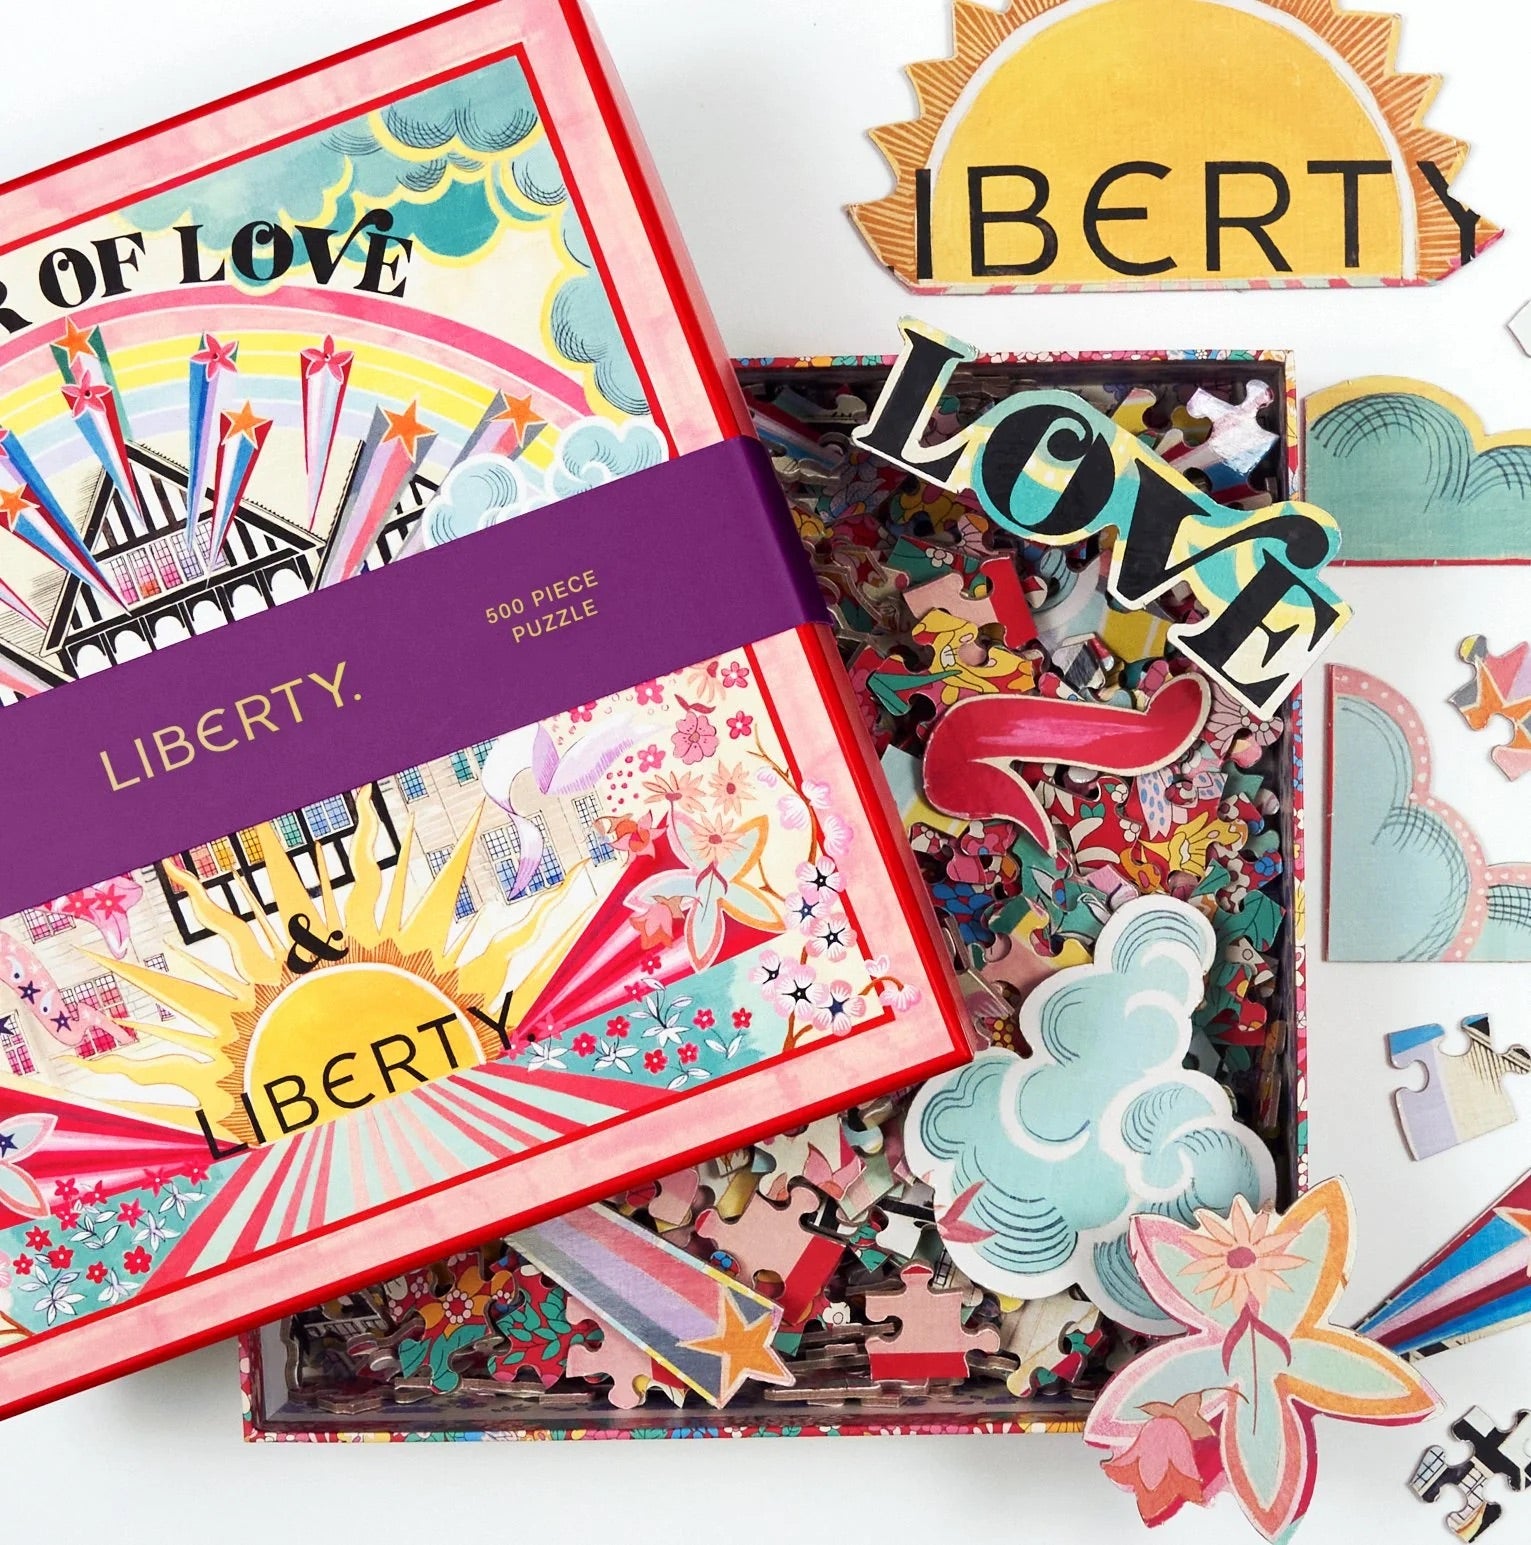 Liberty Power of Love Double Sided Puzzle with Shaped Pieces